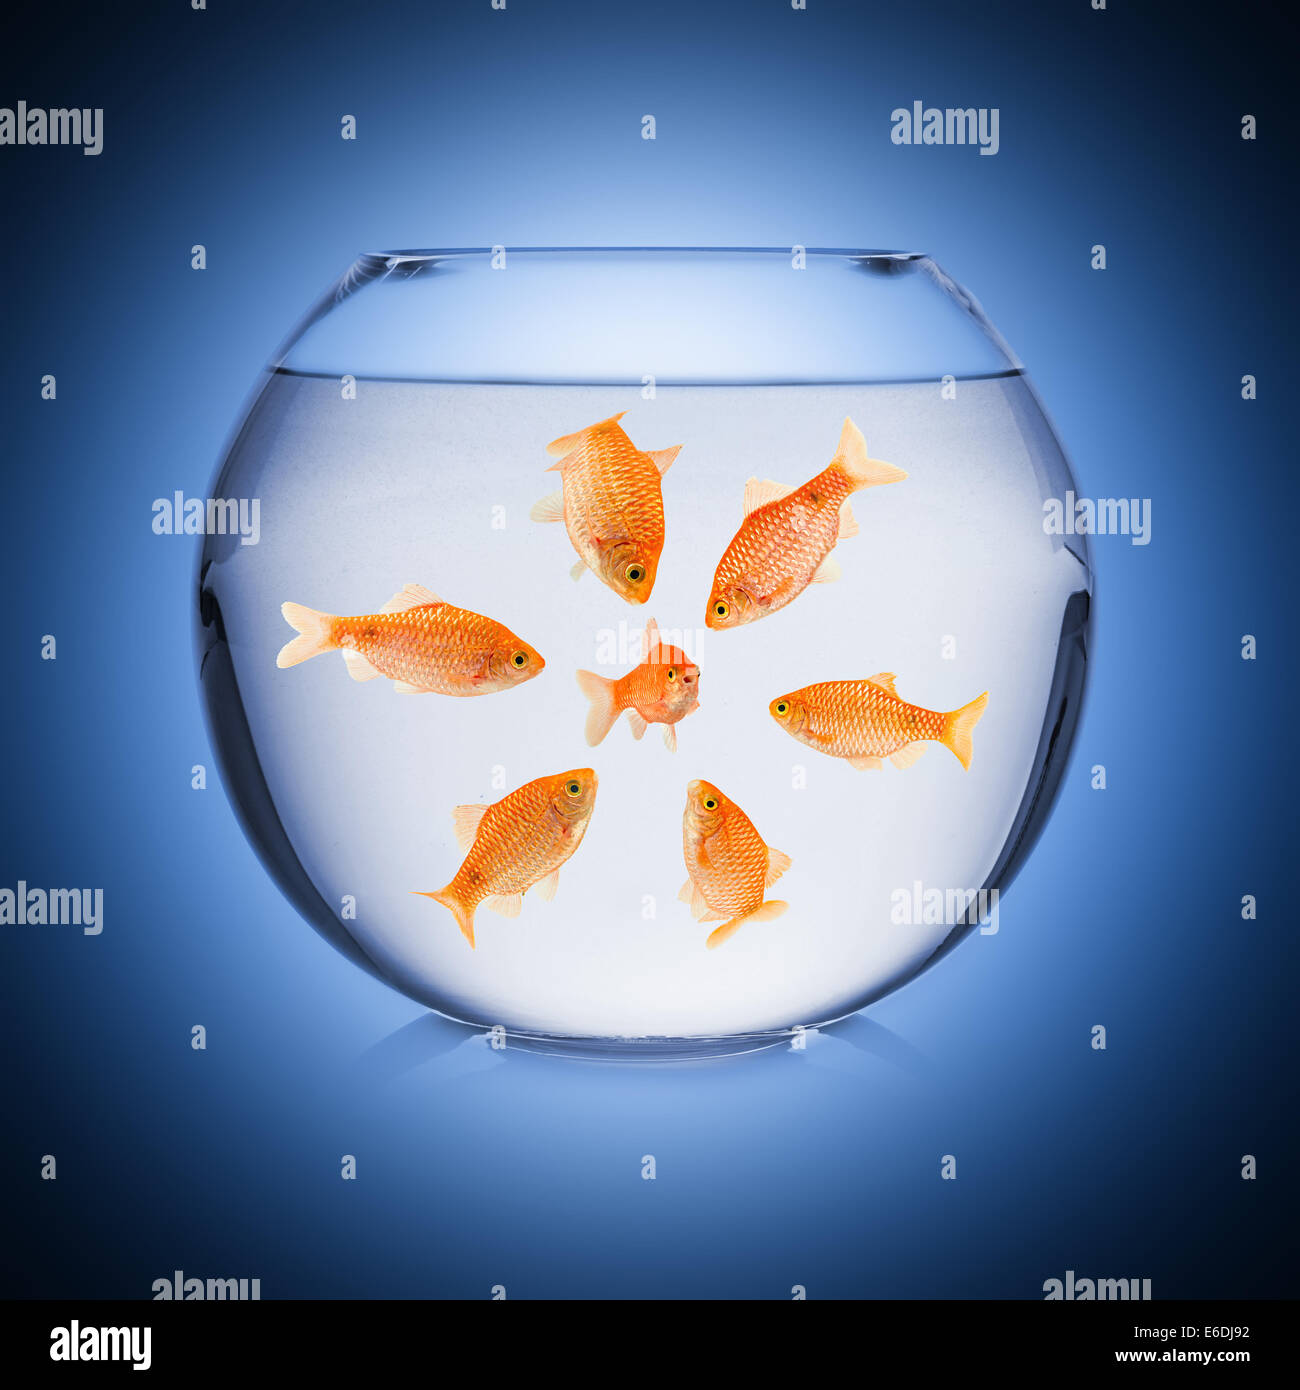 mobbing concept in fish bowl Stock Photo